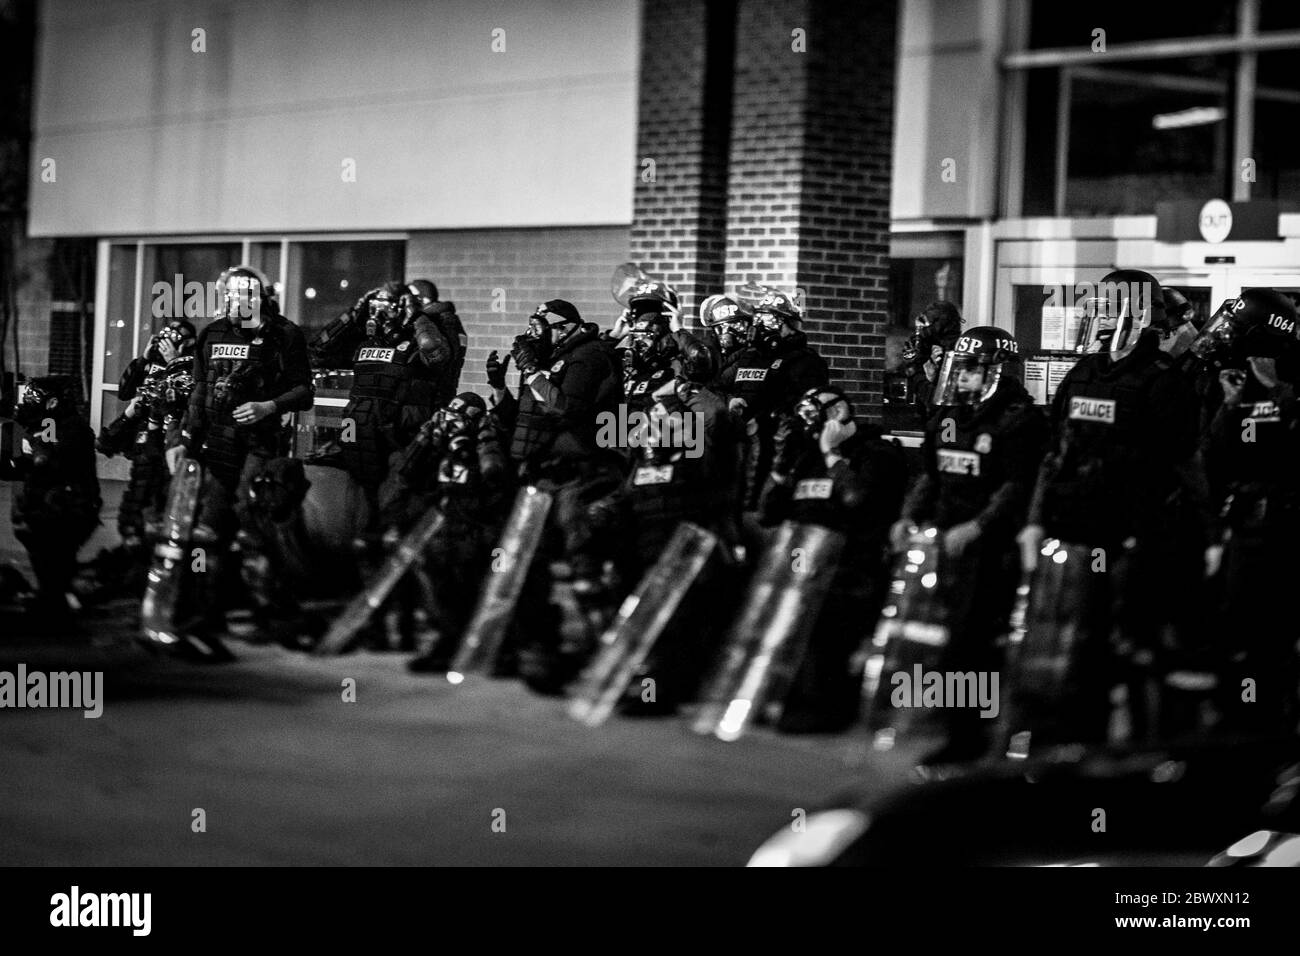 Hampton, Virginia, USA. 2nd June, 2020. Virginia State Police don protective mask at the Peninsula Town Center on Tuesday June 2, 2020 in Hampton, VA. The protest was deemed an unlawful assembly and tear gas, flashbang grenades, and riot control paintballs were used to disperse the crowd. Credit: John C. Clark/ZUMA Wire/Alamy Live News Stock Photo